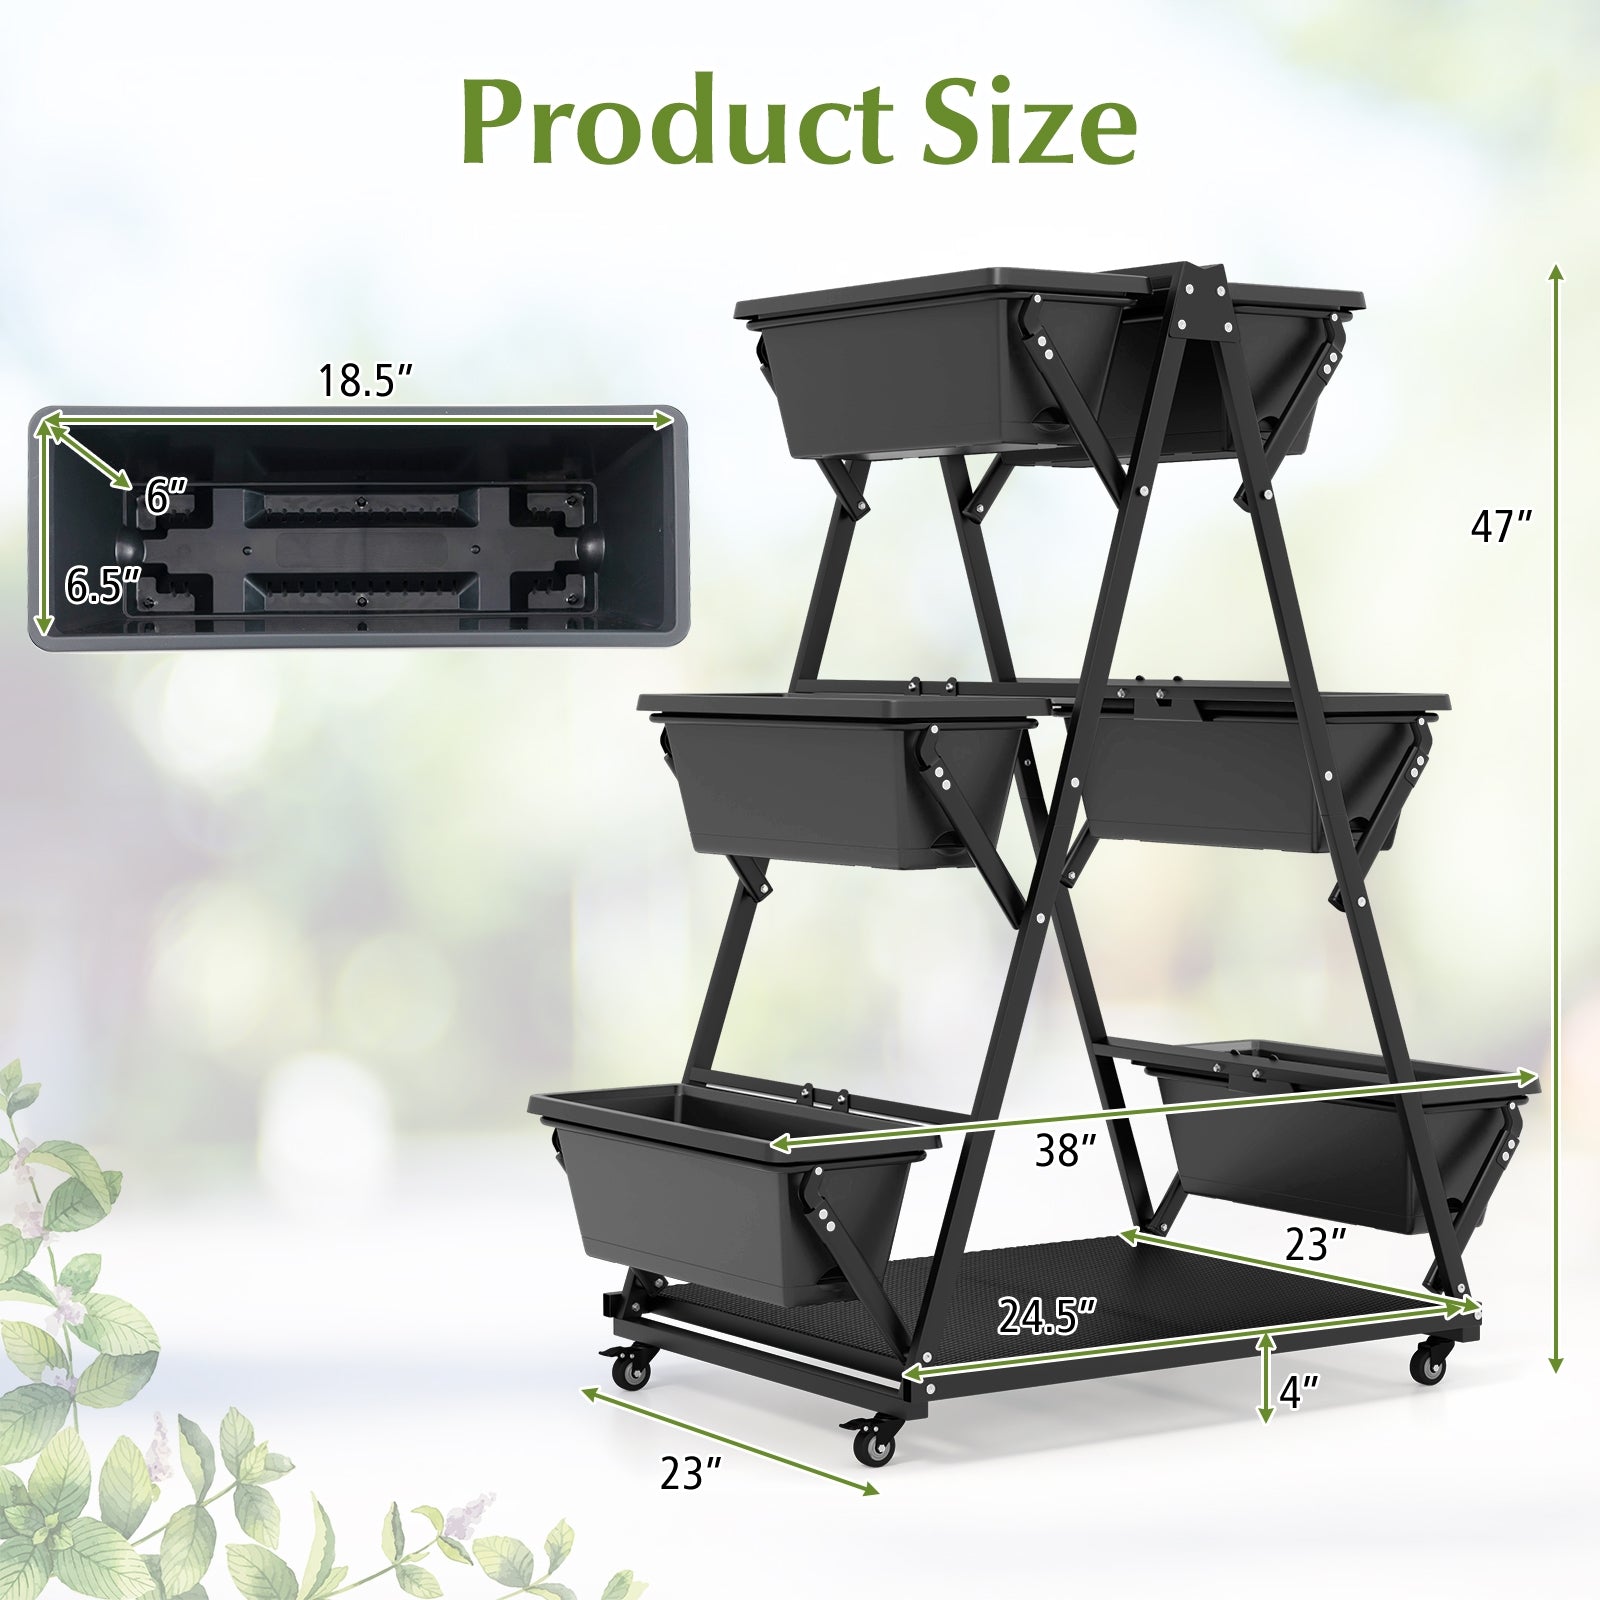 3-Tier Vertical Raised Garden Bed with 4 Wheels and 6 Container Boxes - Gallery View 4 of 10